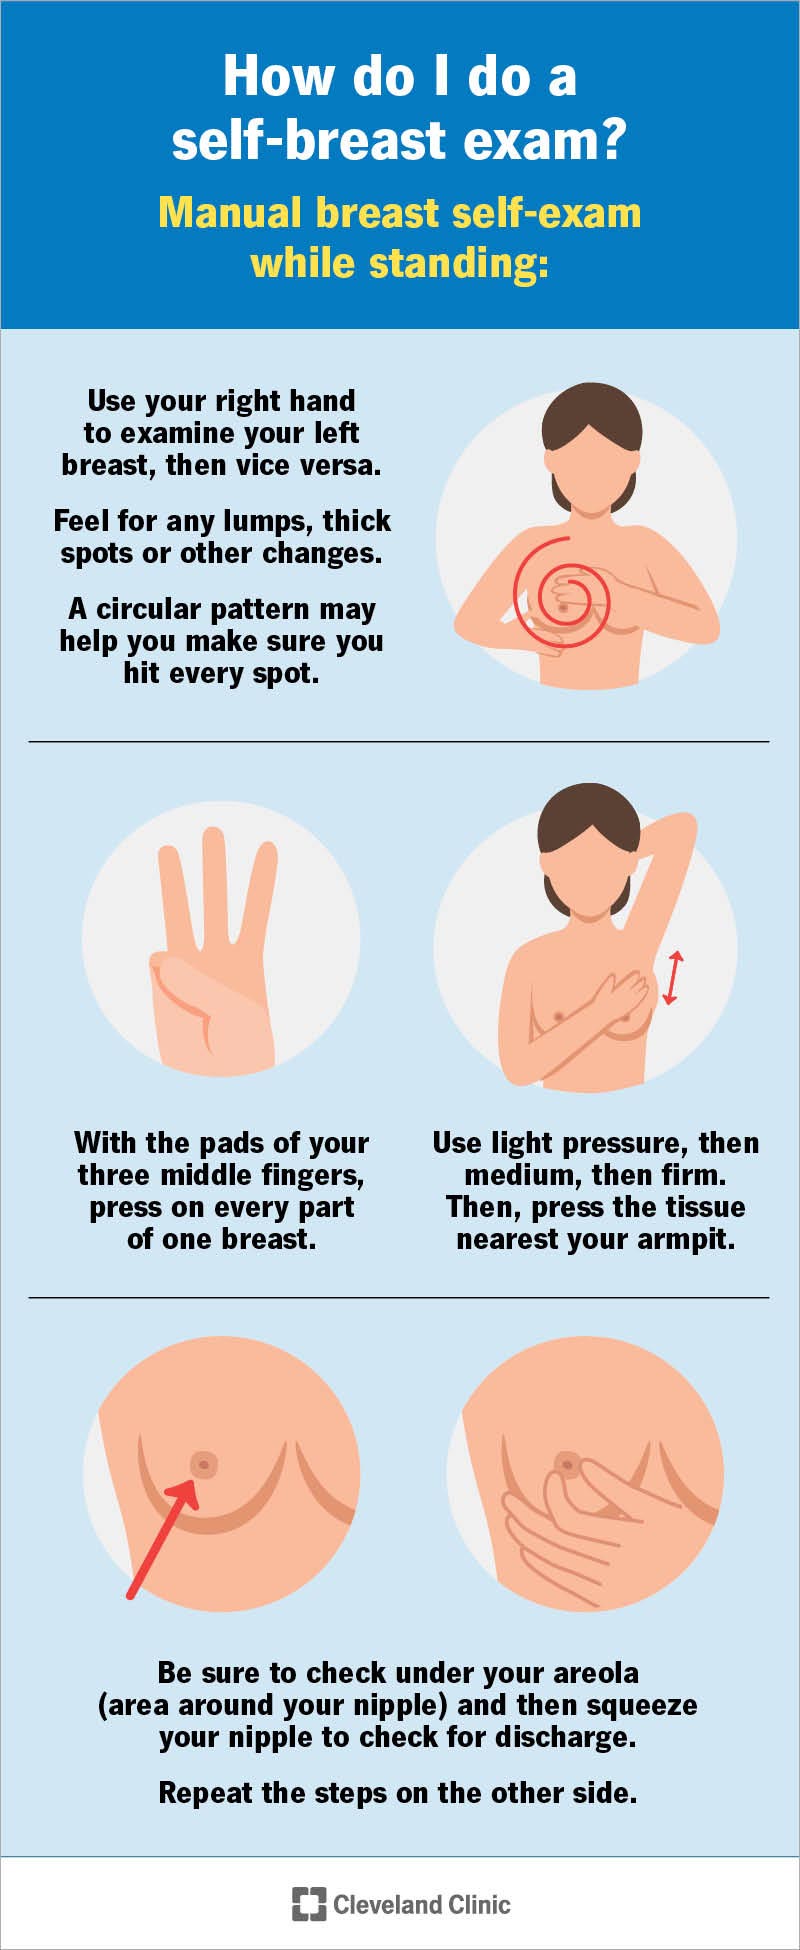 Step by step guide on how to perform a self breast-exam at home.